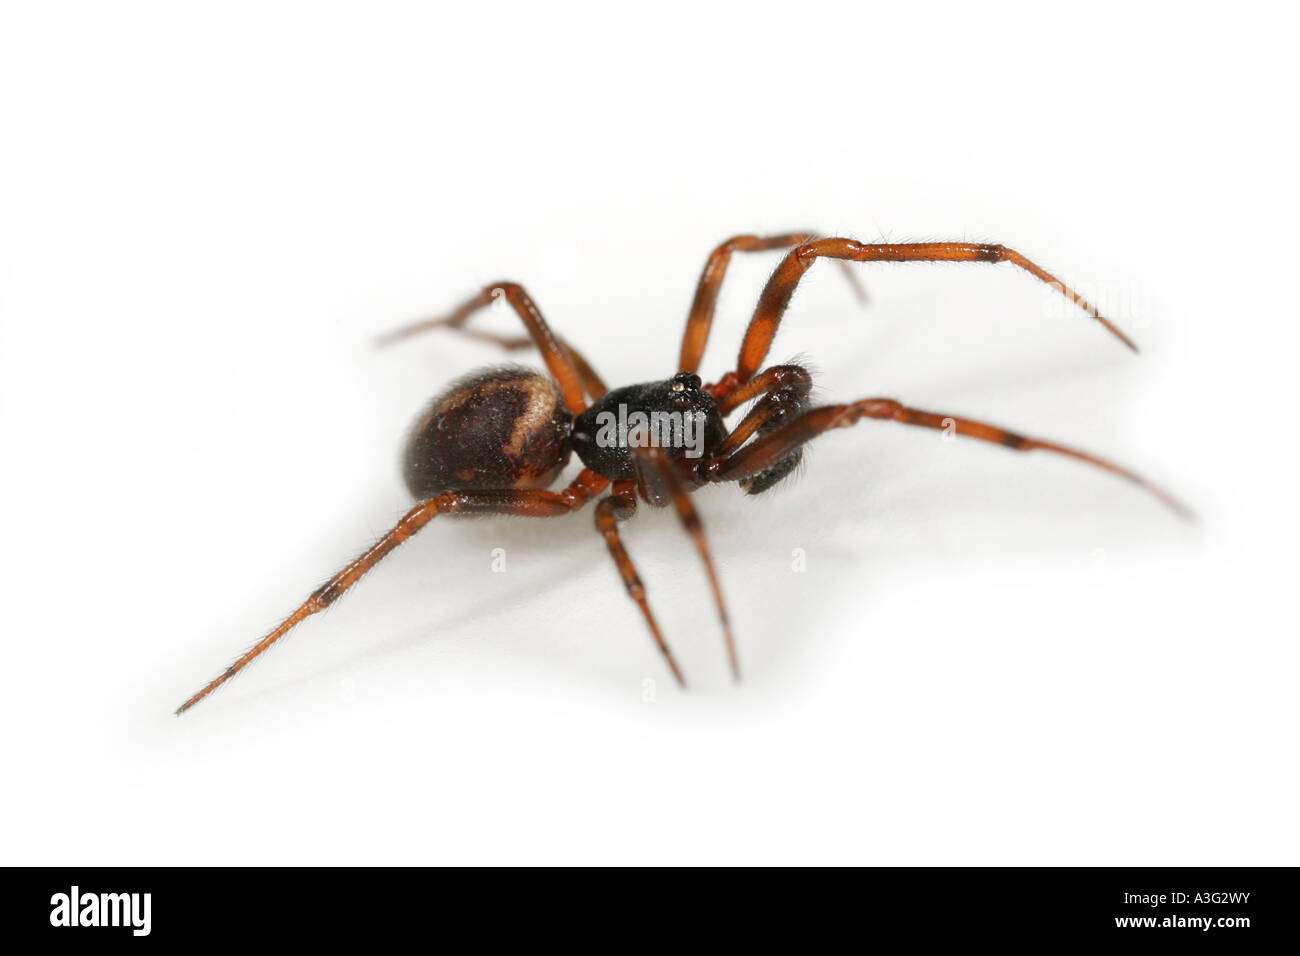 A male Steatoda bipunctata spider, Theridiidae family, on white background. Stock Photo